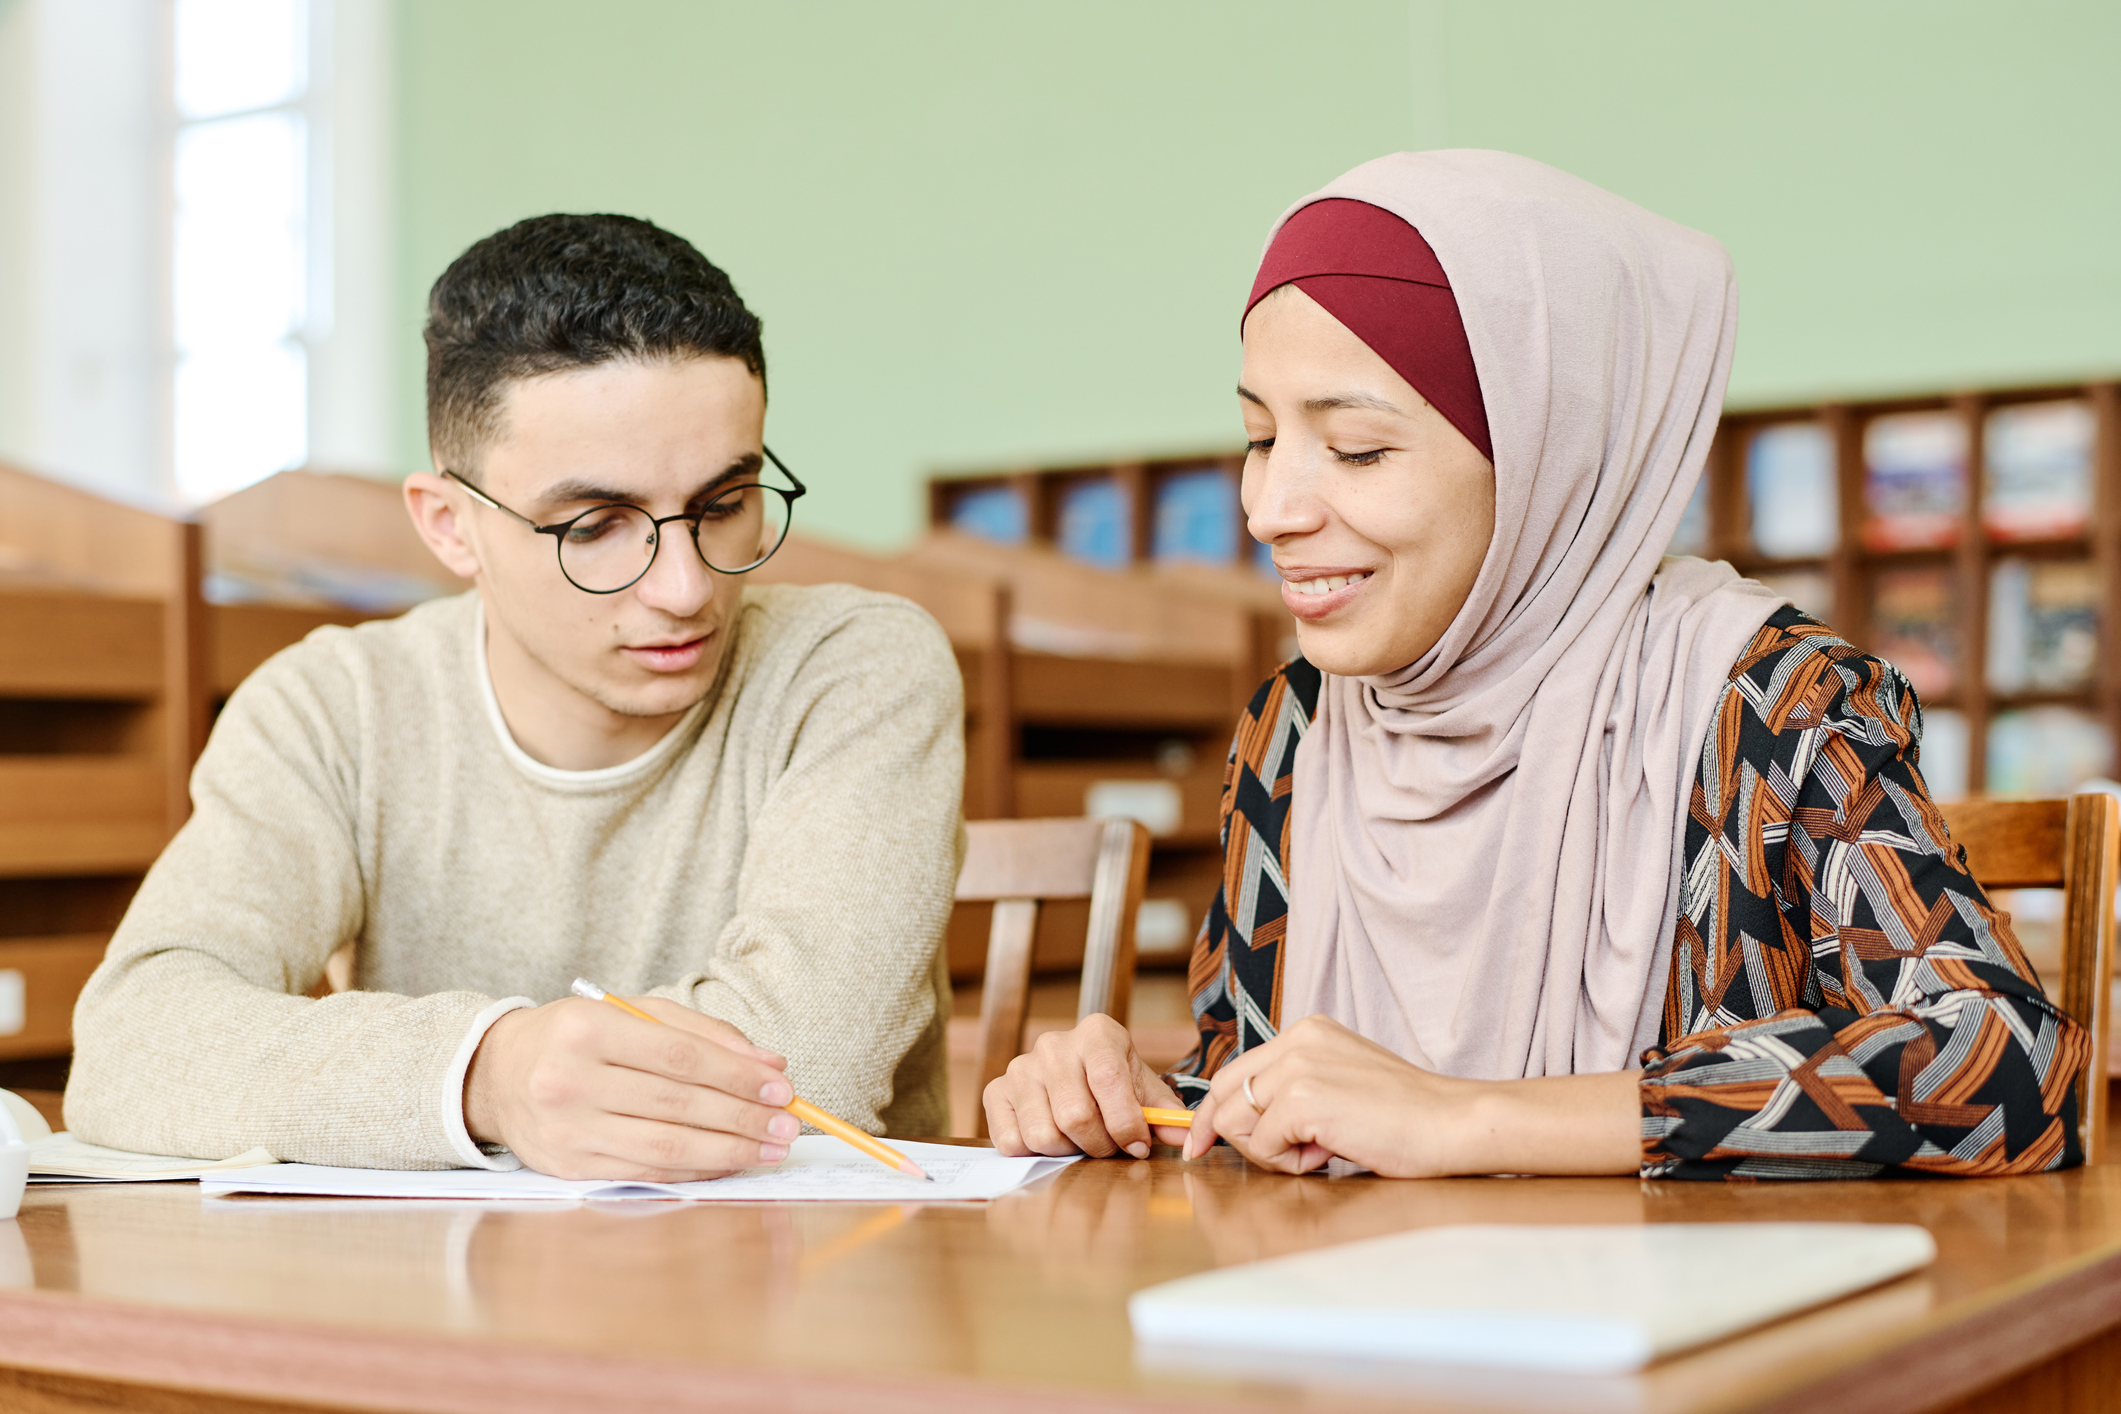 American colleges and universities can, and should, support refugee resettlement